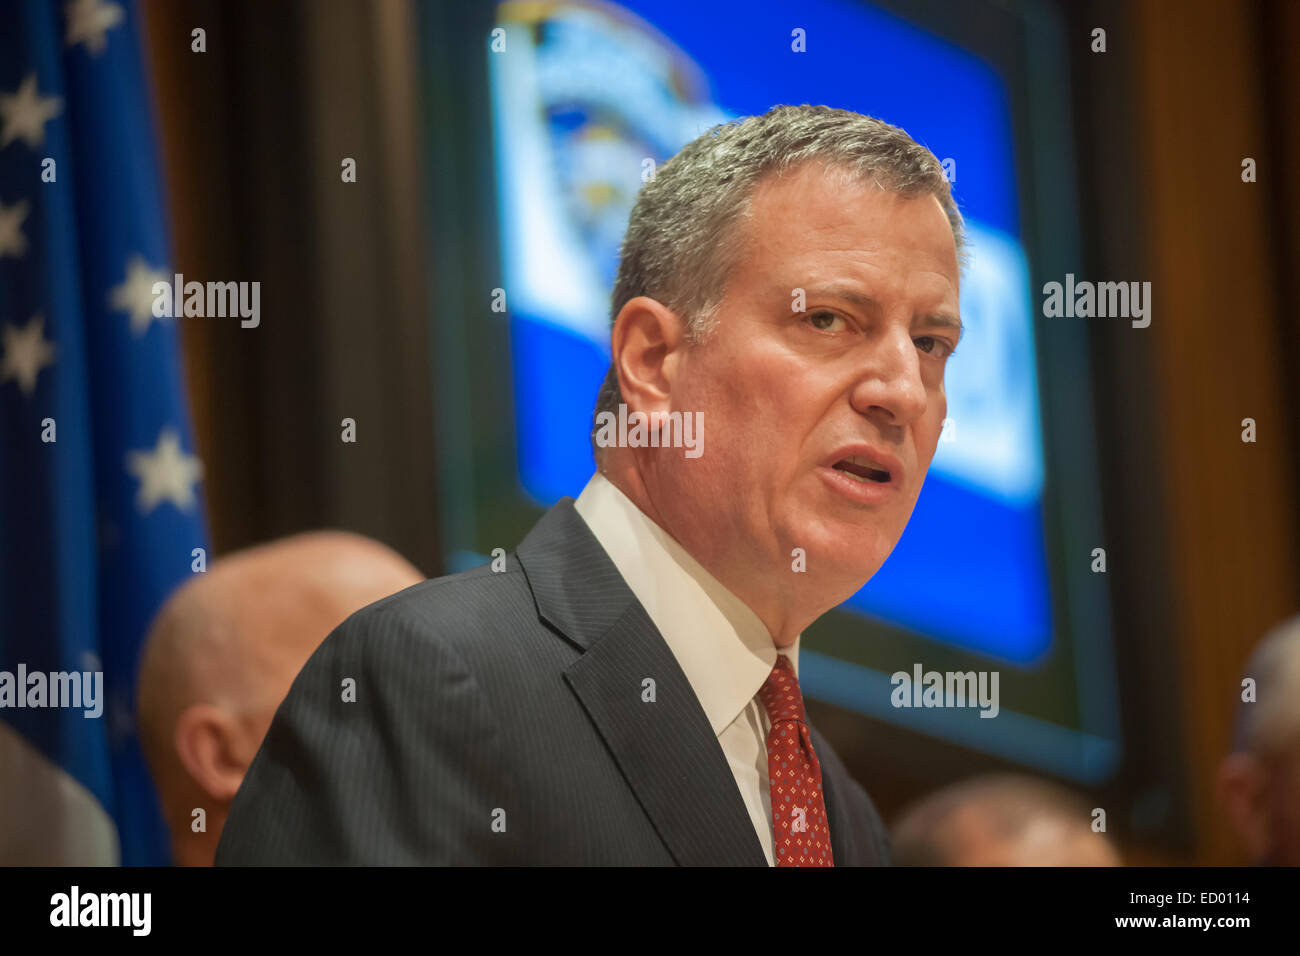 New York, NY, USA. 22nd Dec, 2014. New York Mayor Bill de Blasio briefs the media in One Police Plaza about the ongoing investigation of the assassination of two NYPD officers, Wenjian Liu and Rafael Ramos by Ismaaiyl Brinsley.  The officers were murdered in Brooklyn in their squad car by Brinsley allegedly in retaliation for the Eric Garner death. Brinsley killed himself in the subway during his attempted escape. Credit:  Richard Levine/Alamy Live News Stock Photo